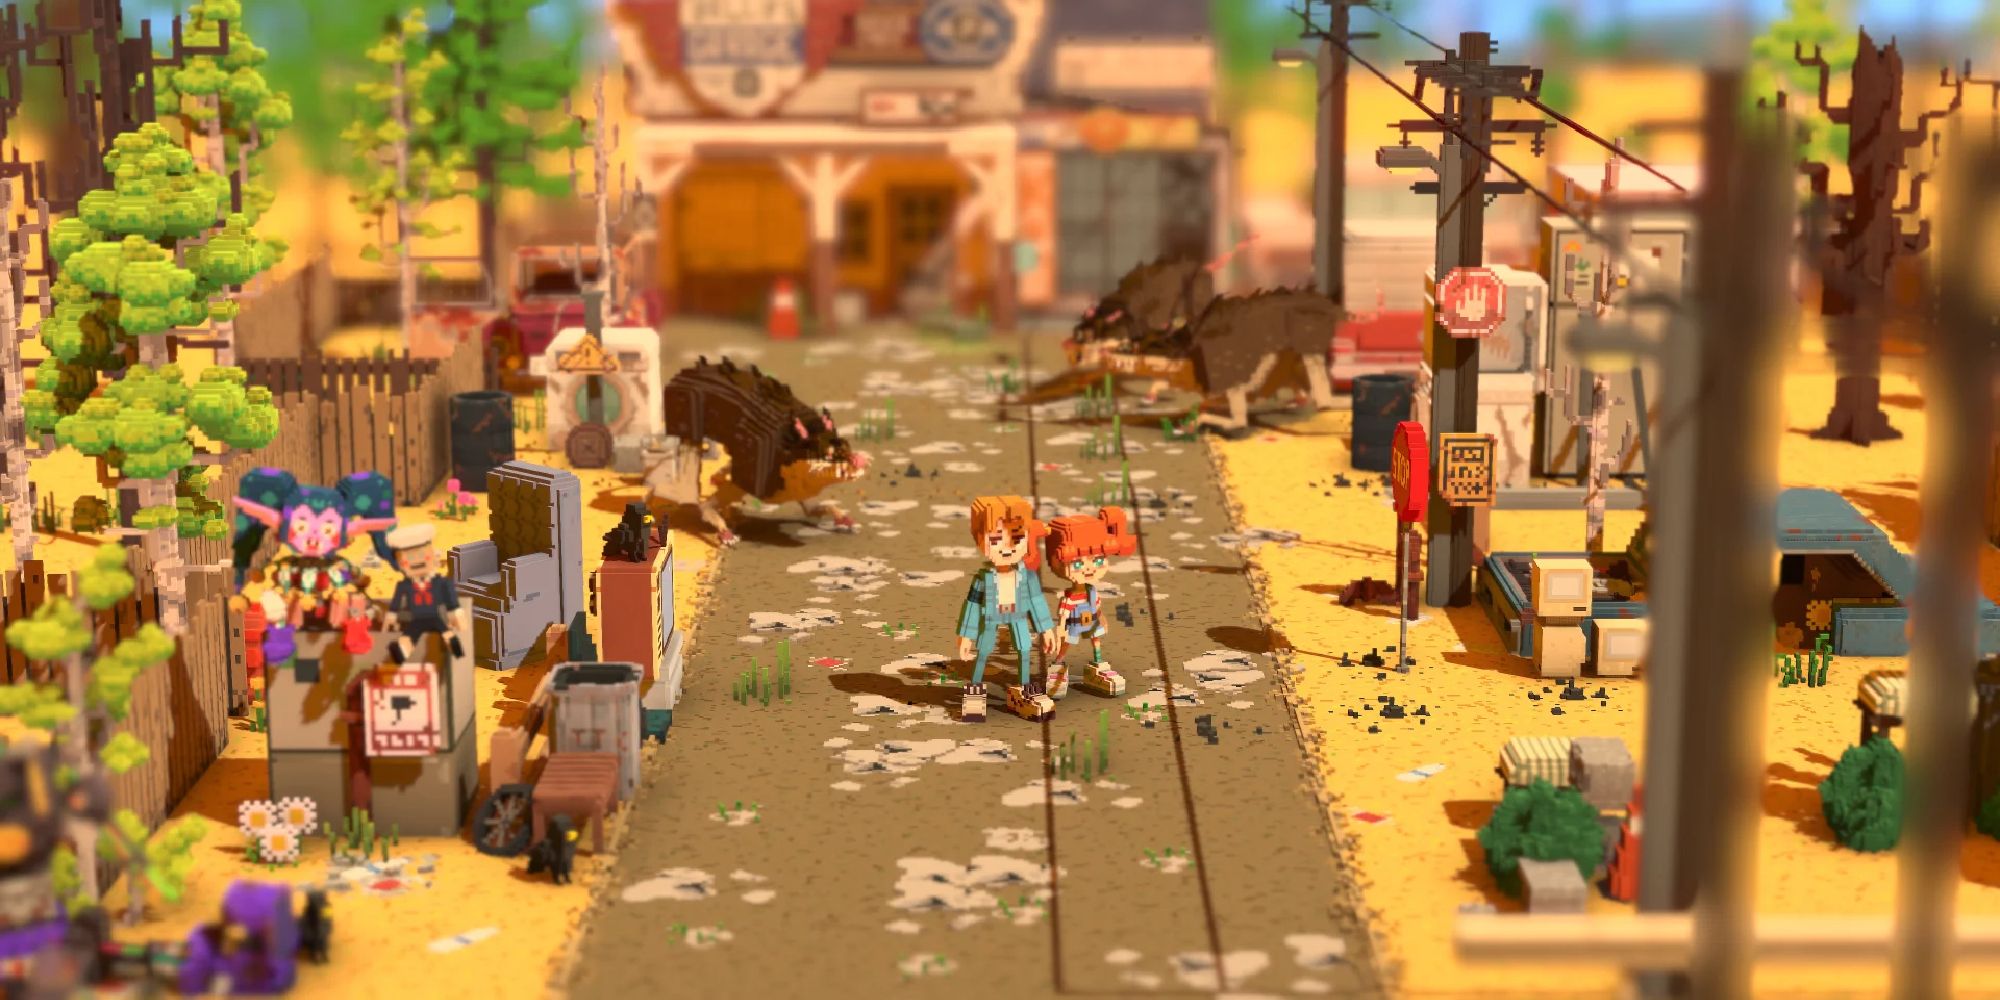 Giant rats lurk behind the player character and his sister in Echo Generation's overworld